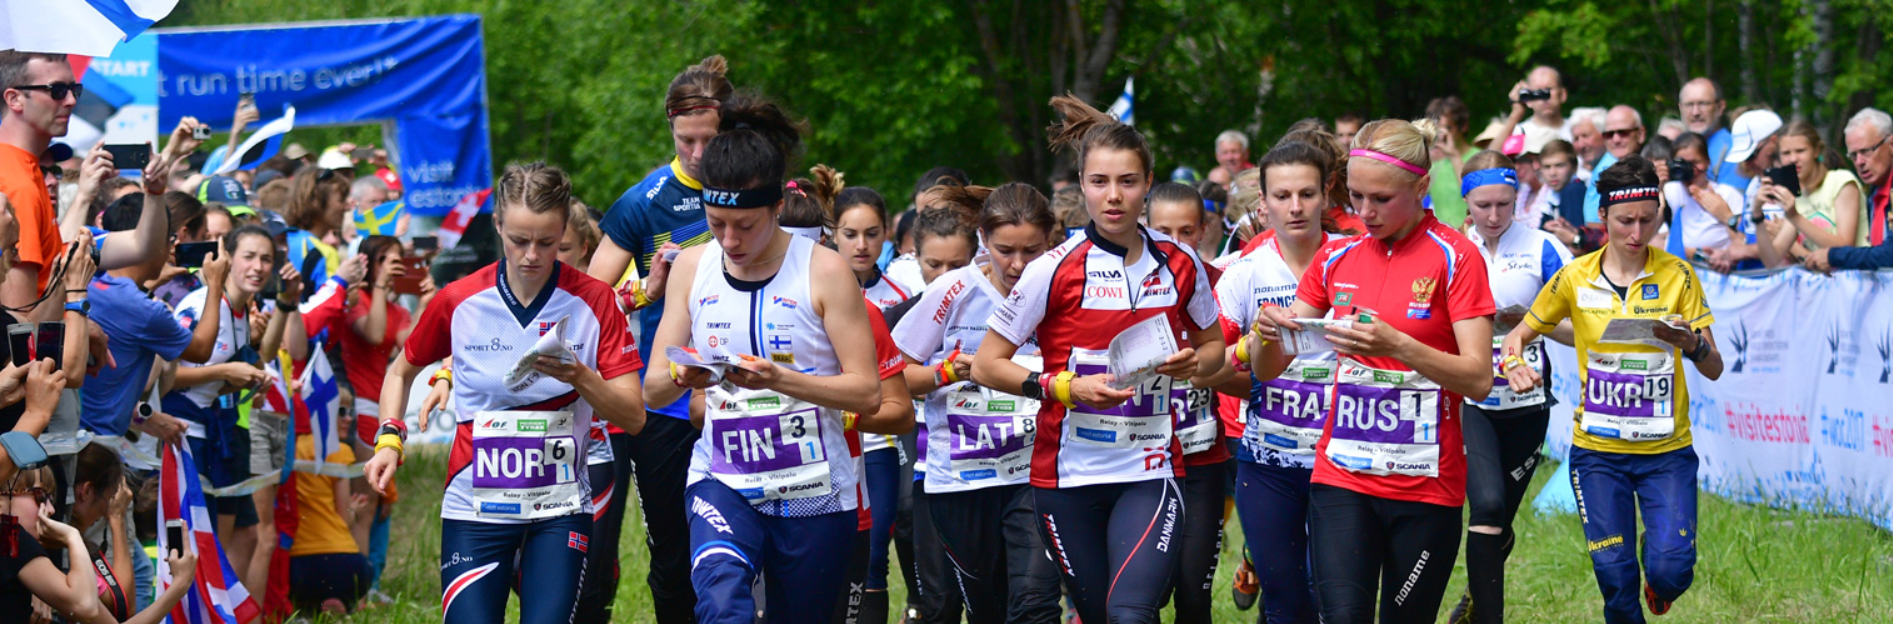 The 2019 World Orienteering Championships are due to take place in Østfold in Norway from August 12 to 17 ©WOC 2019